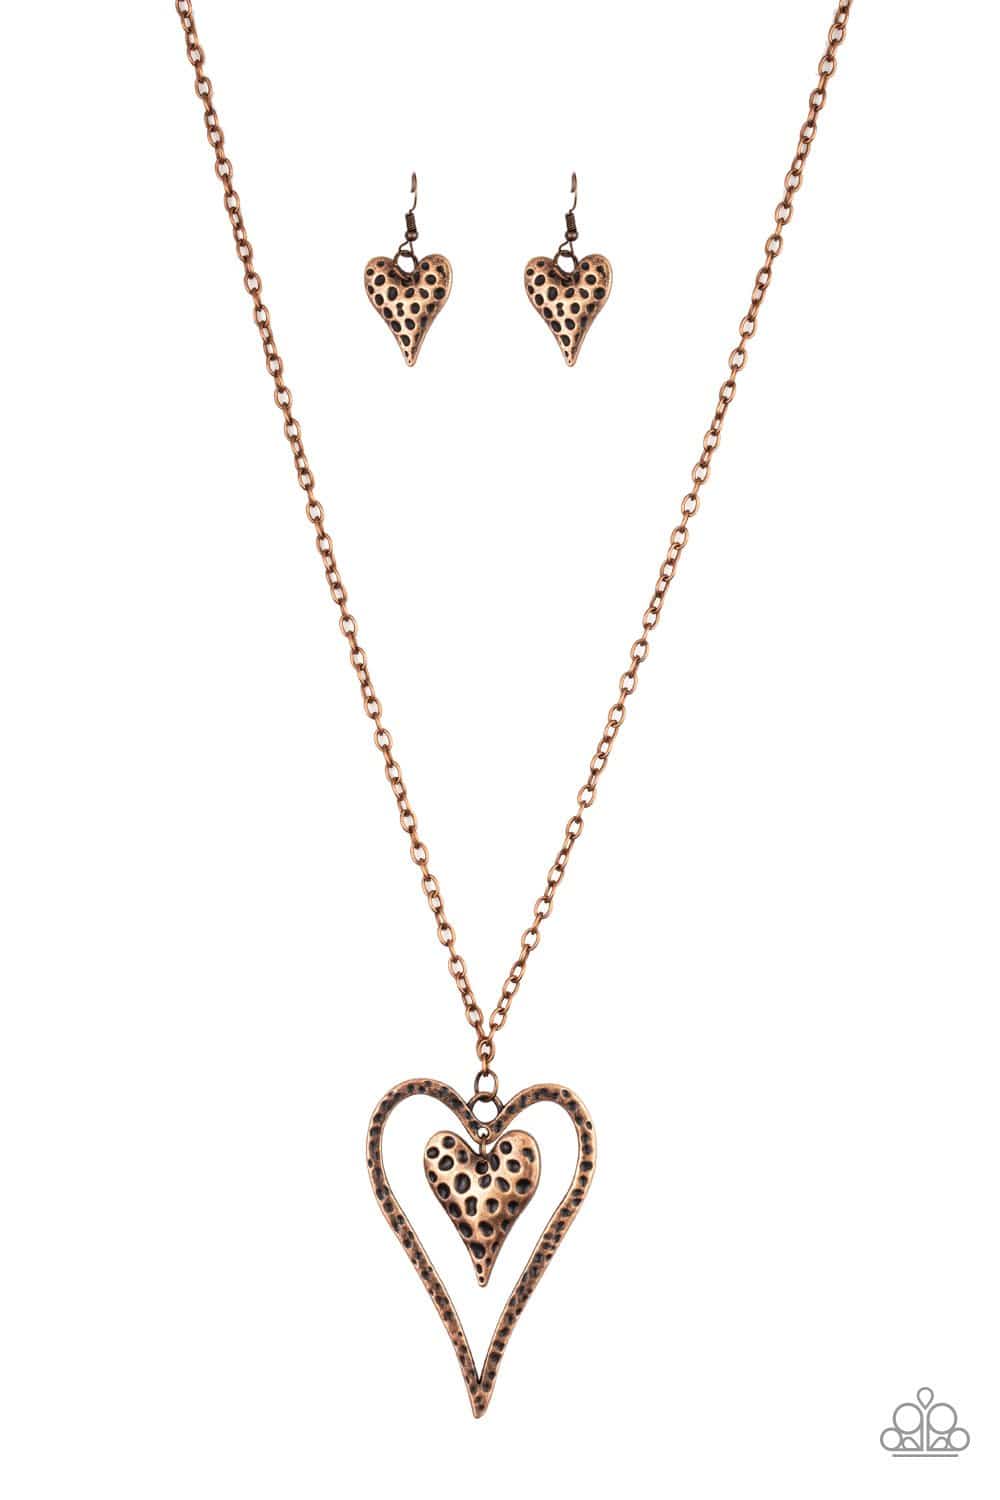 Hardened Hearts - Copper Heart Necklace - Paparazzi Accessories - GlaMarous Titi Jewels